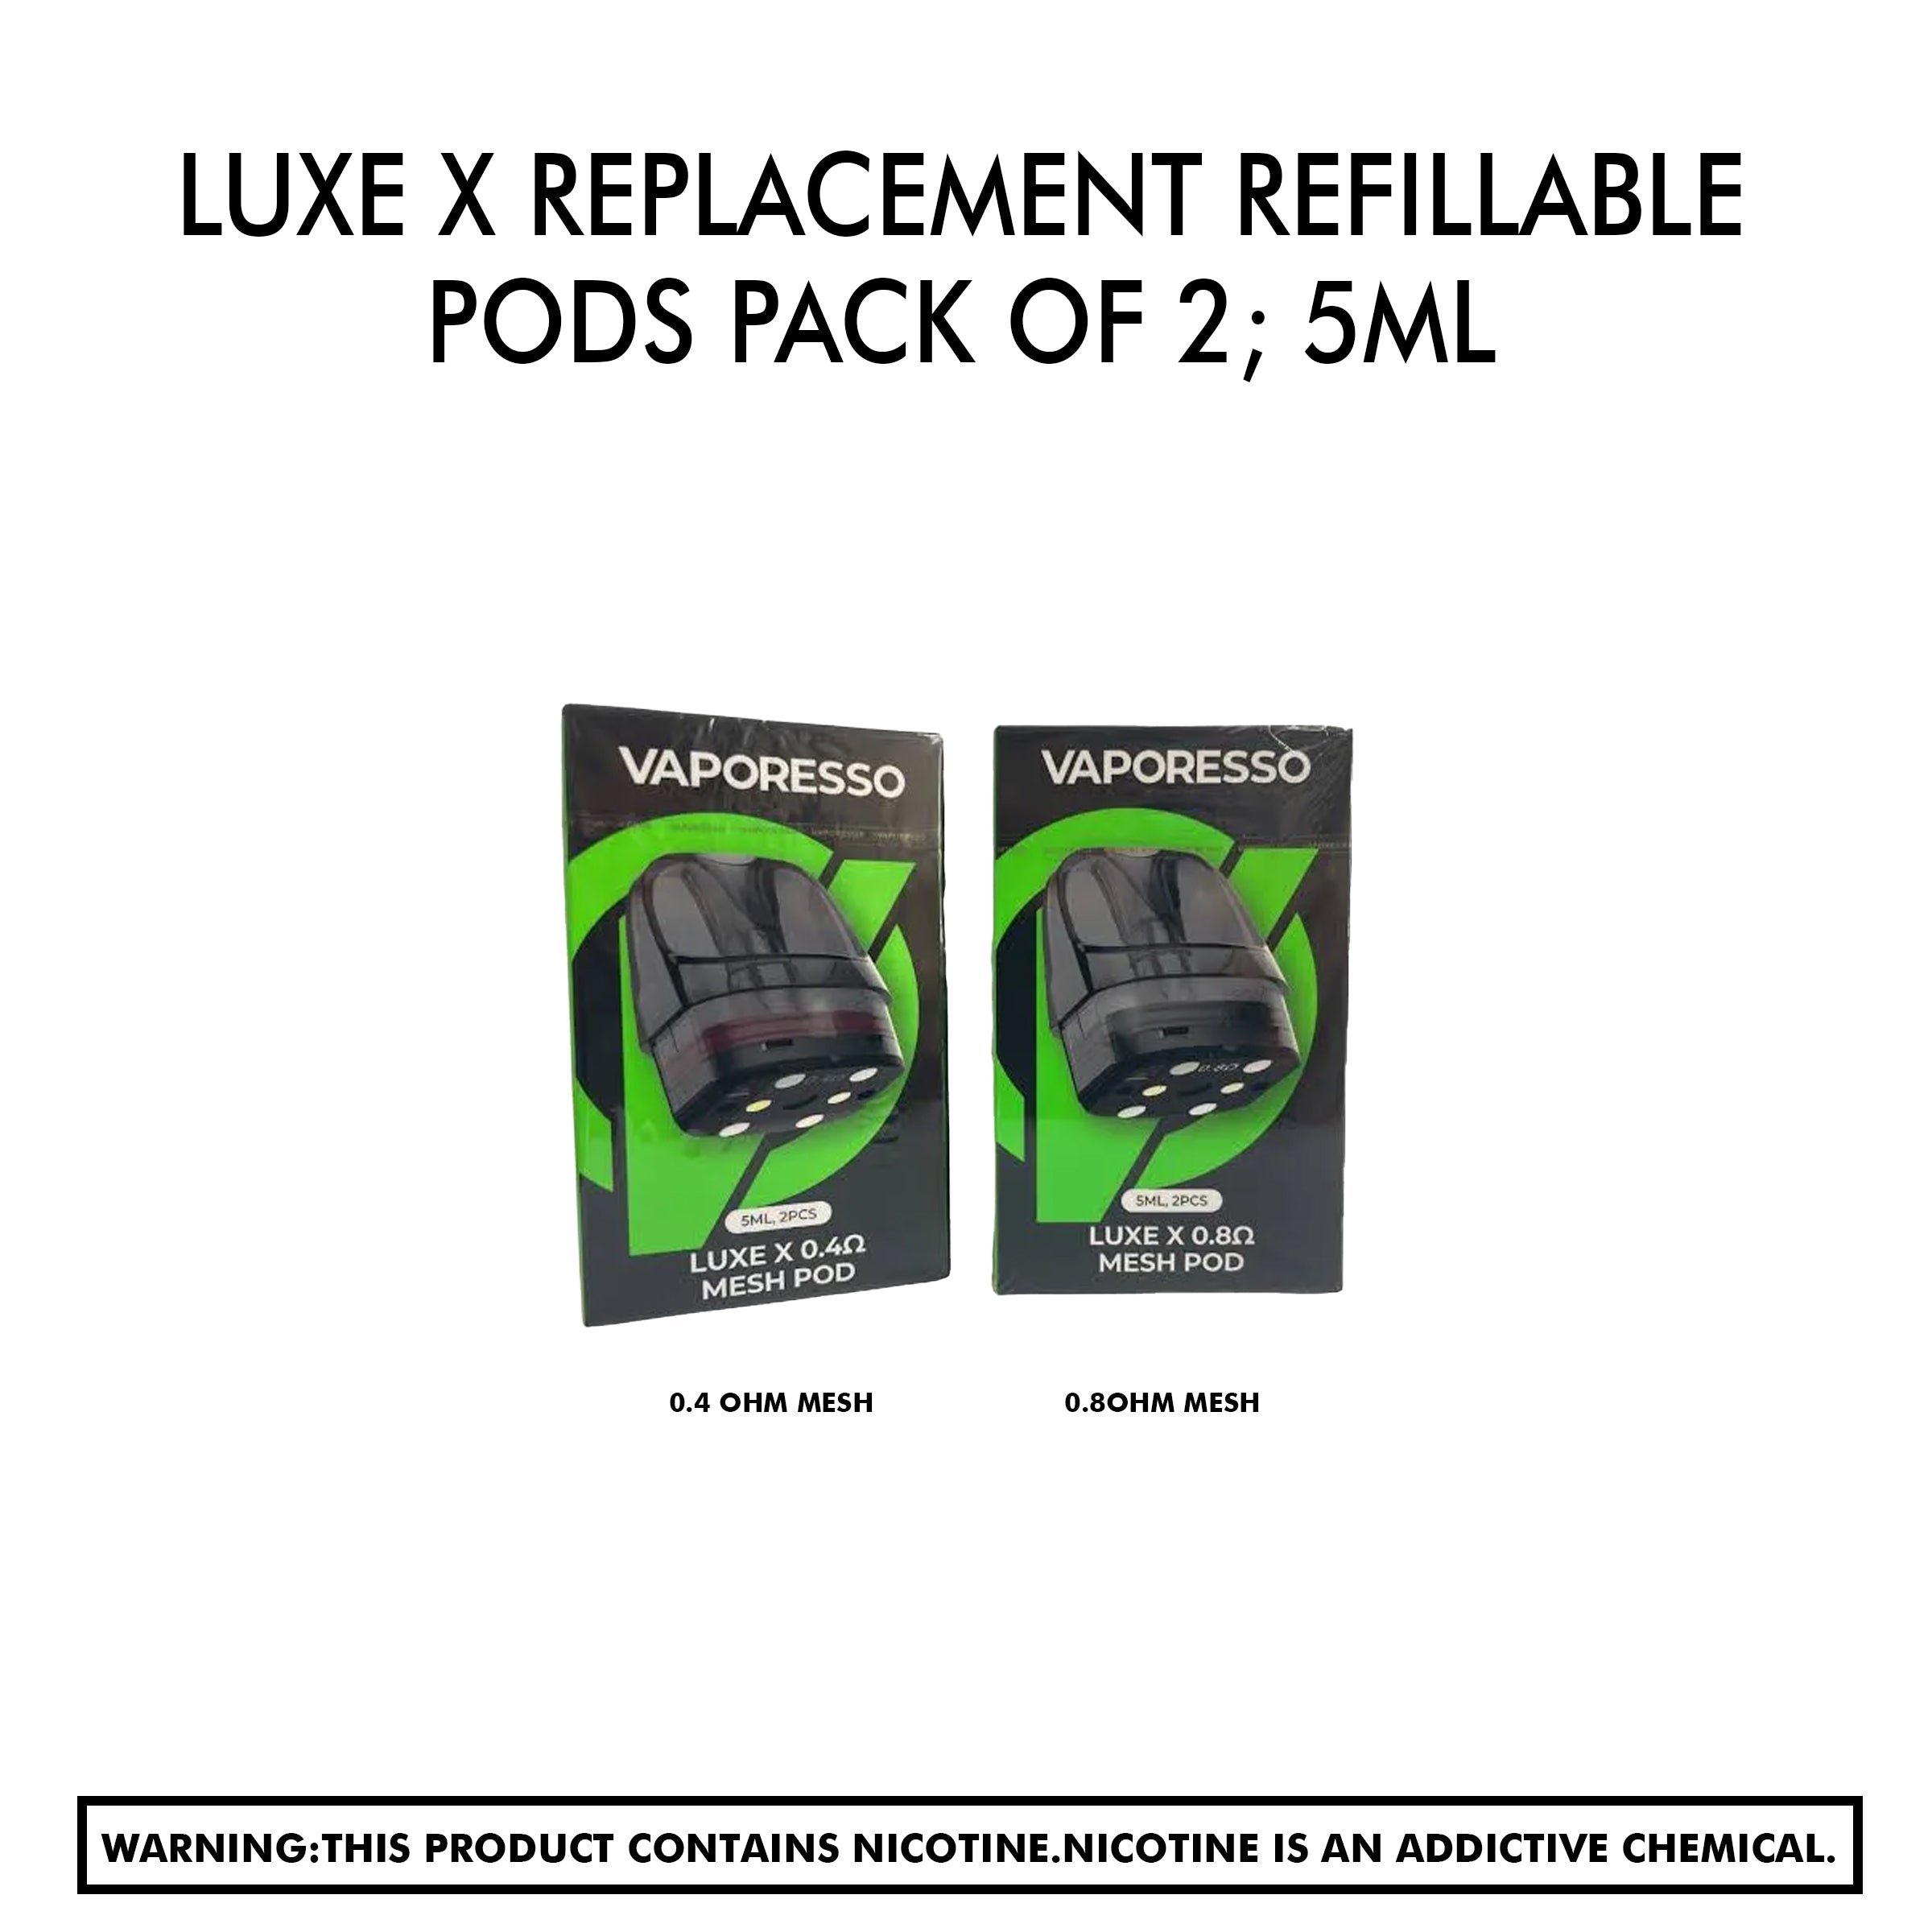 Luxe X Replacement refillable Pods Pack of 2; 5ml